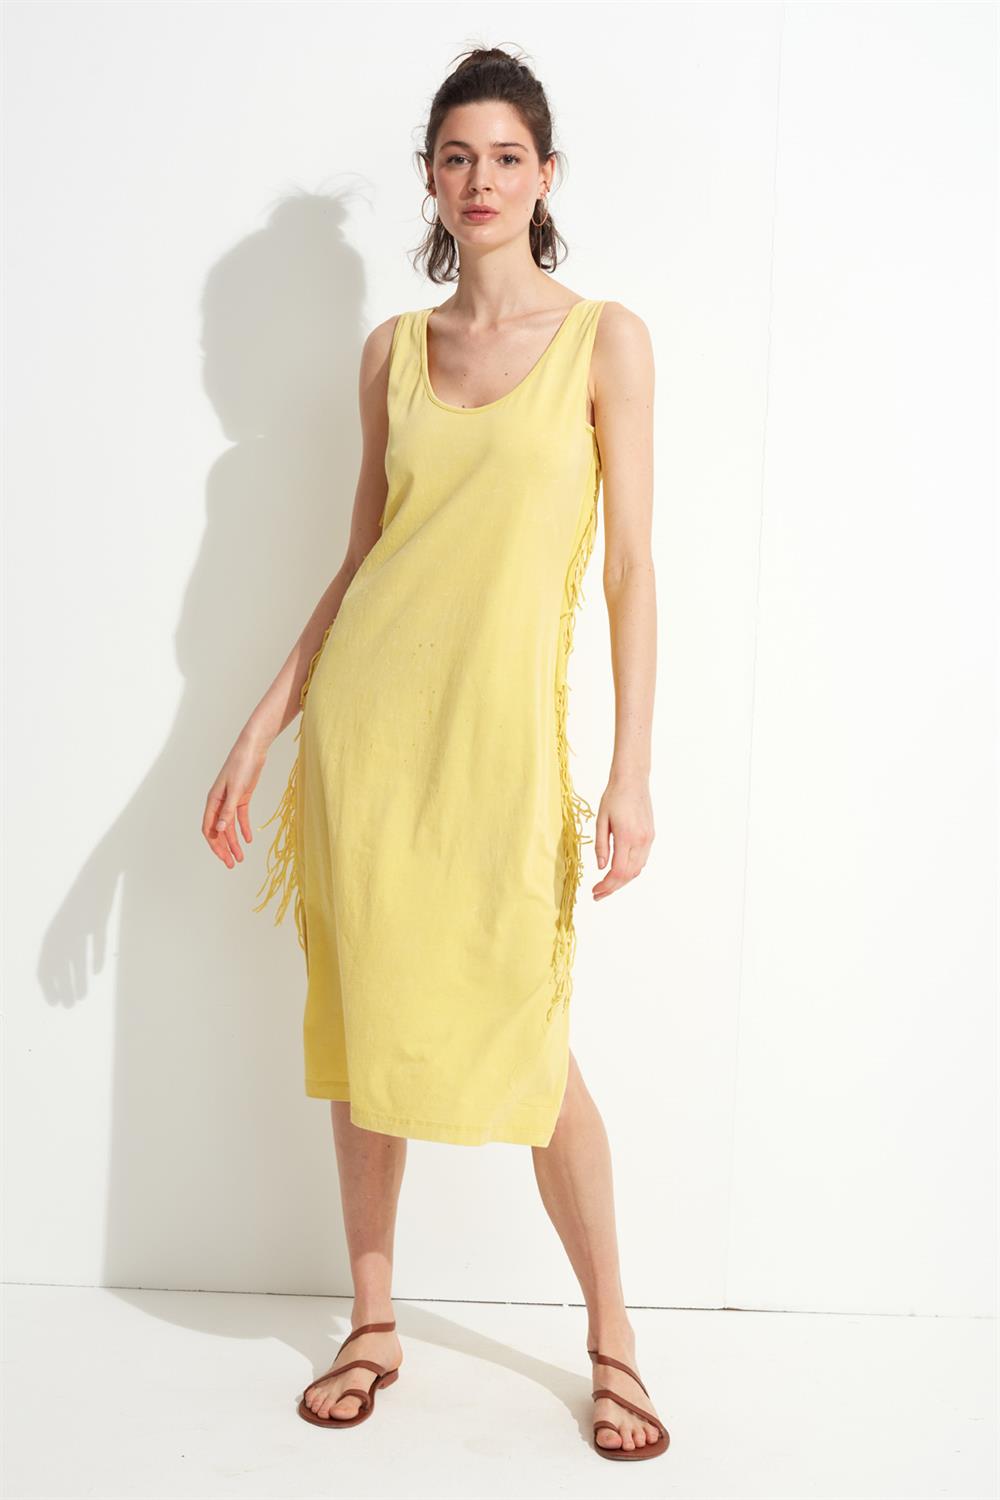 Less is More Tulum Elbise Pareo Yellow LM22508